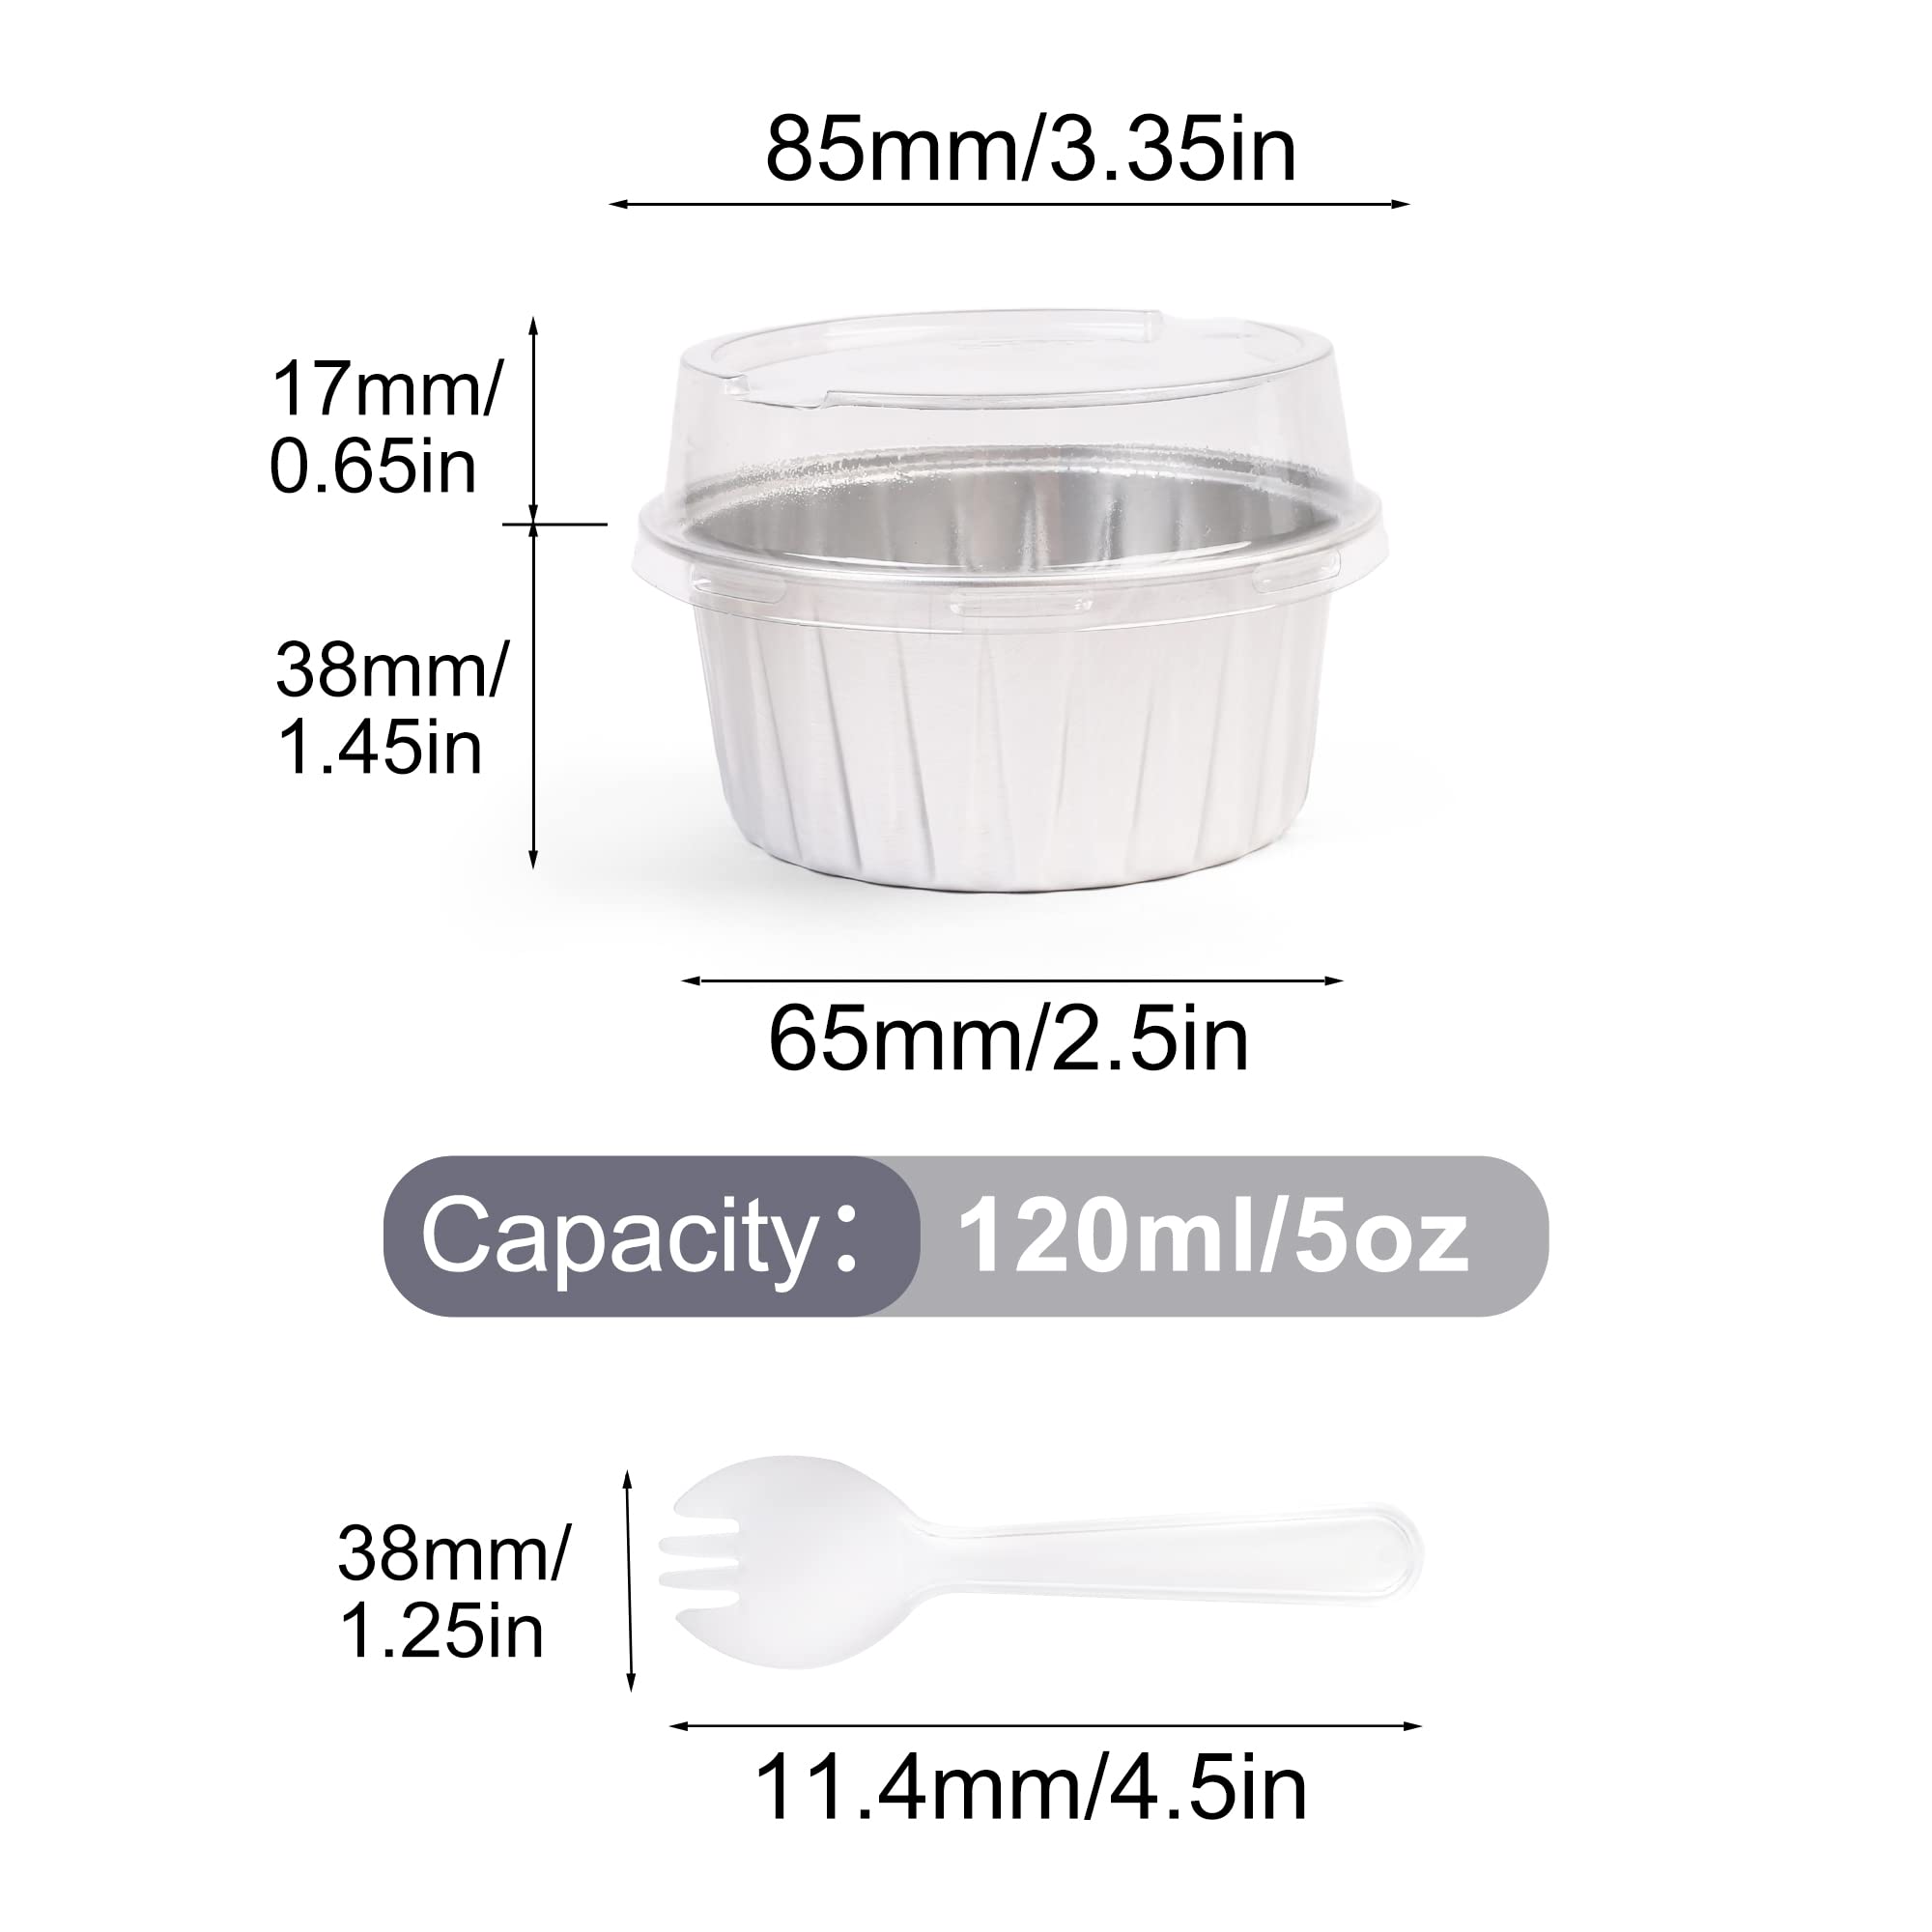 LotFancy Aluminum Foil Cupcake Baking Cups with Lids and Spoons, 5oz/125ml, 50 Pack Disposable Creme Brulee Ramekins, Oven Safe Mini Cake Tins Muffin Cups, Silver